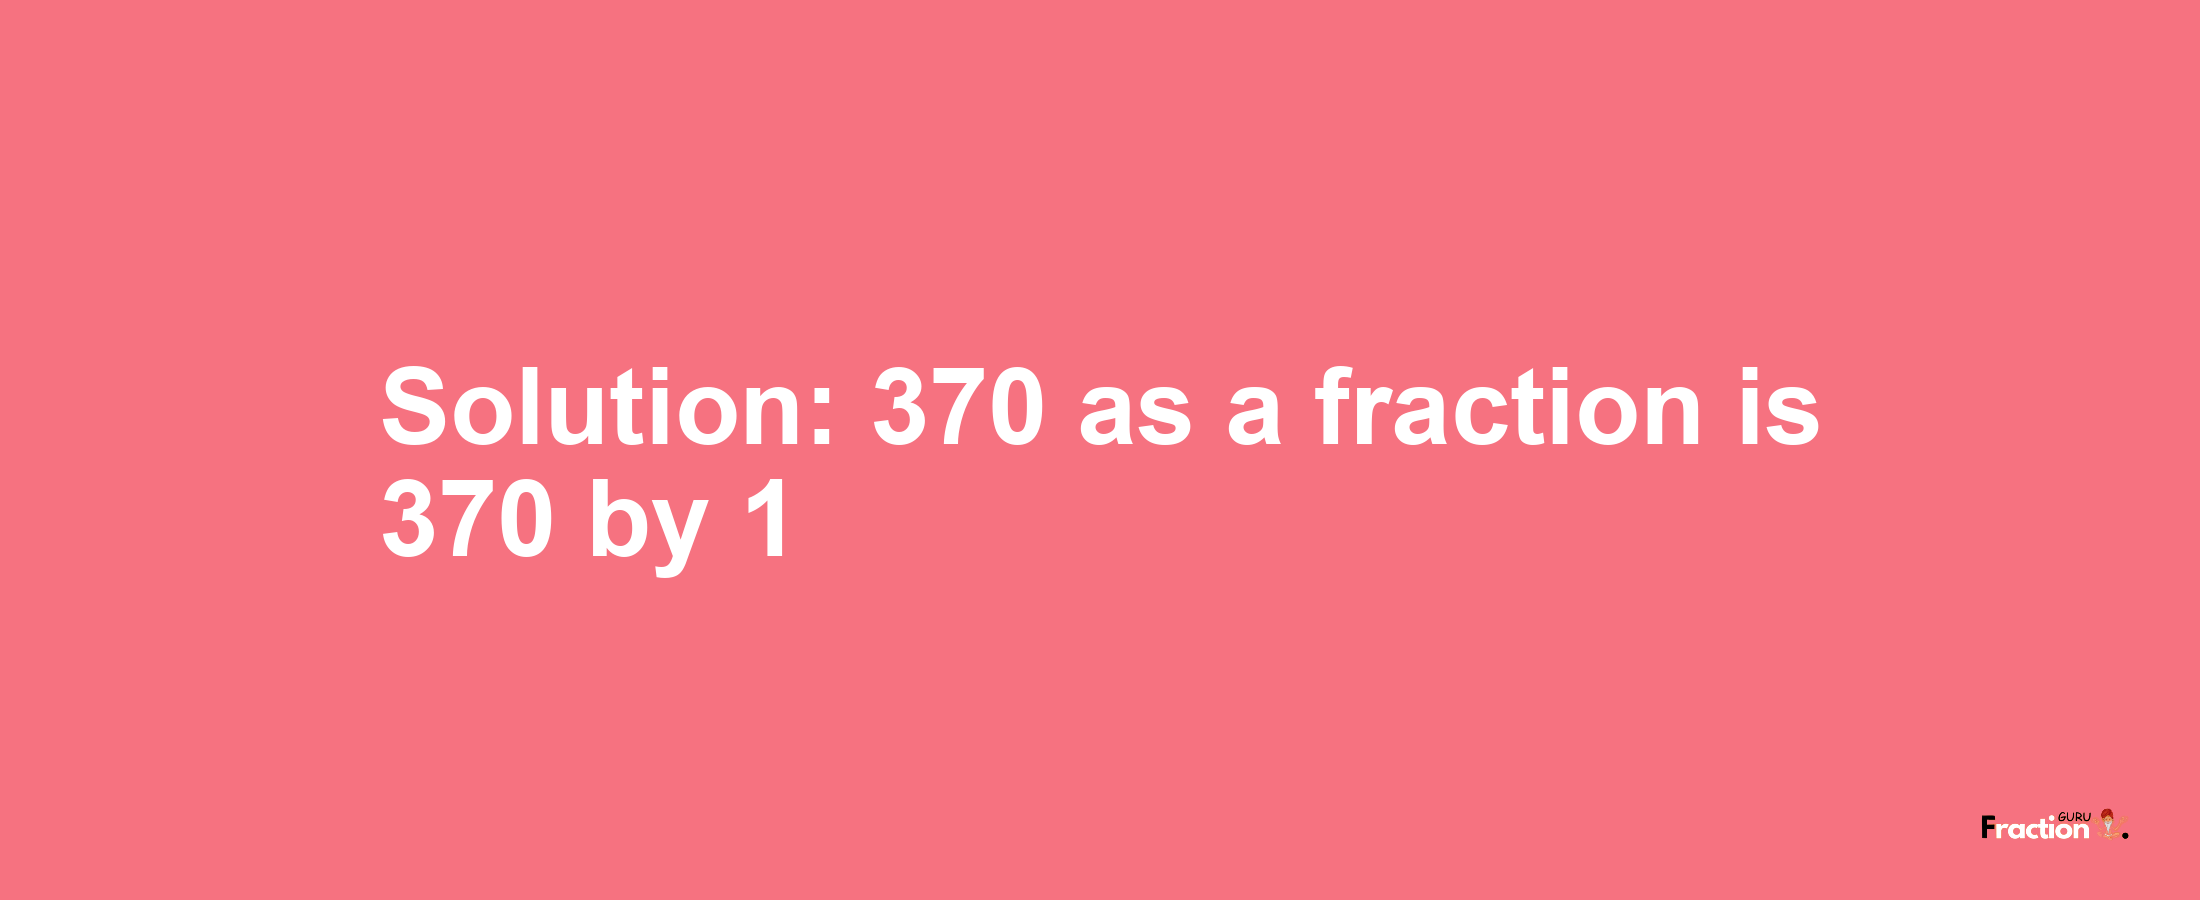 Solution:370 as a fraction is 370/1